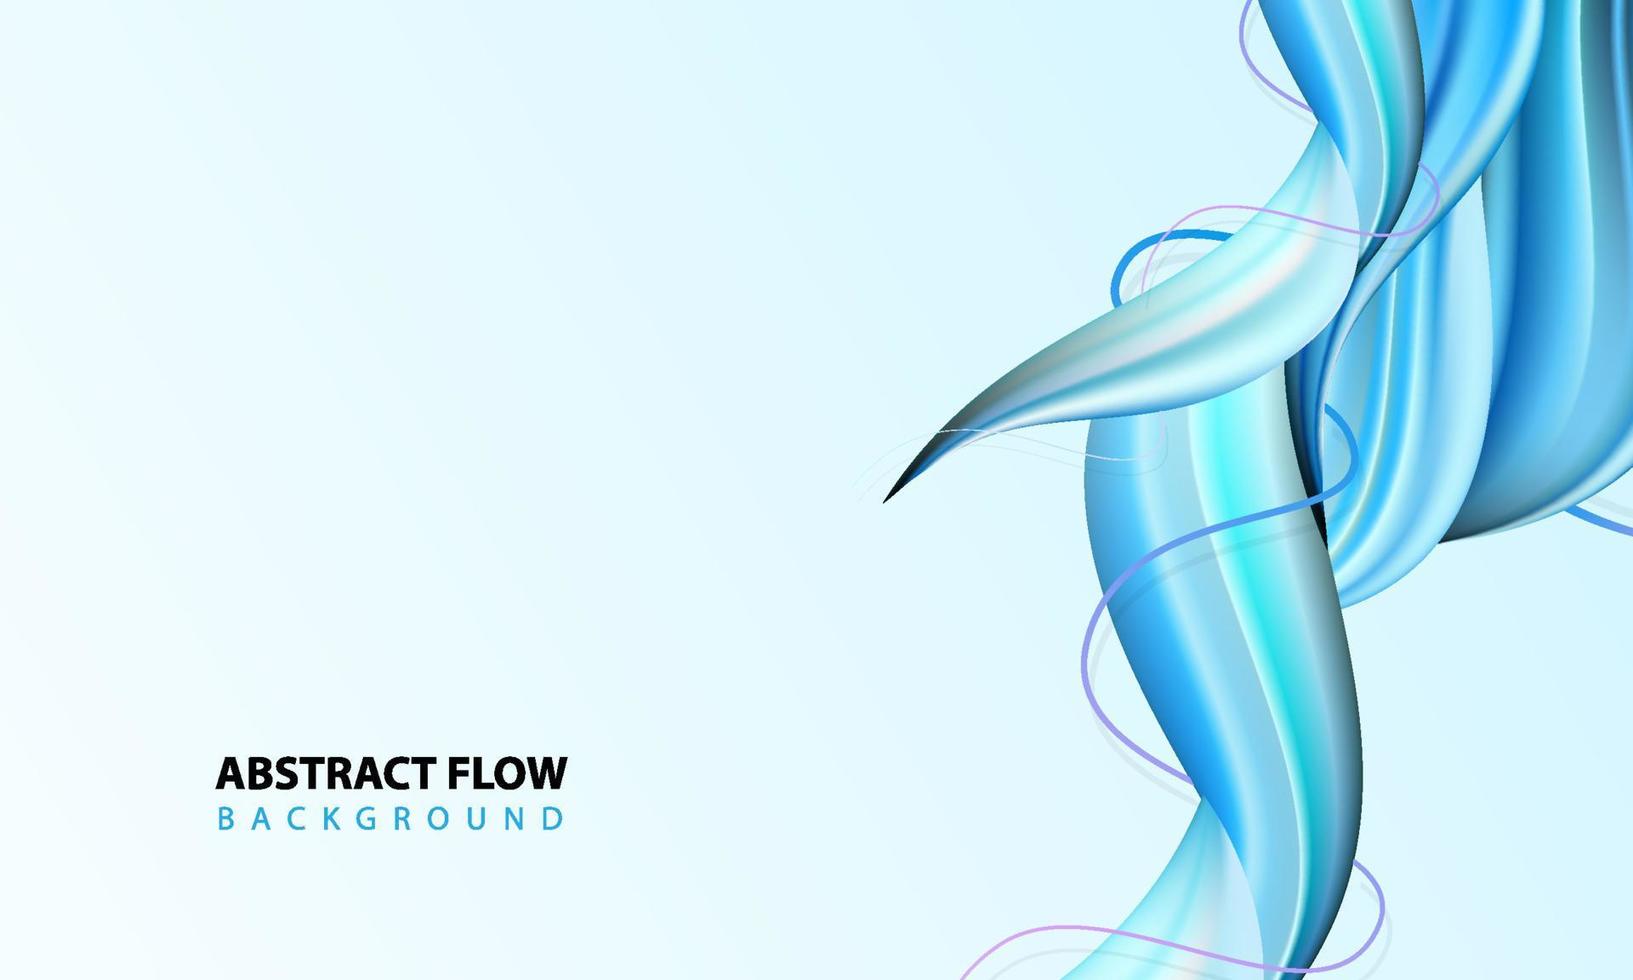 Modern flow poster. Abstract wave Liquid blue background. Vector illustratrion